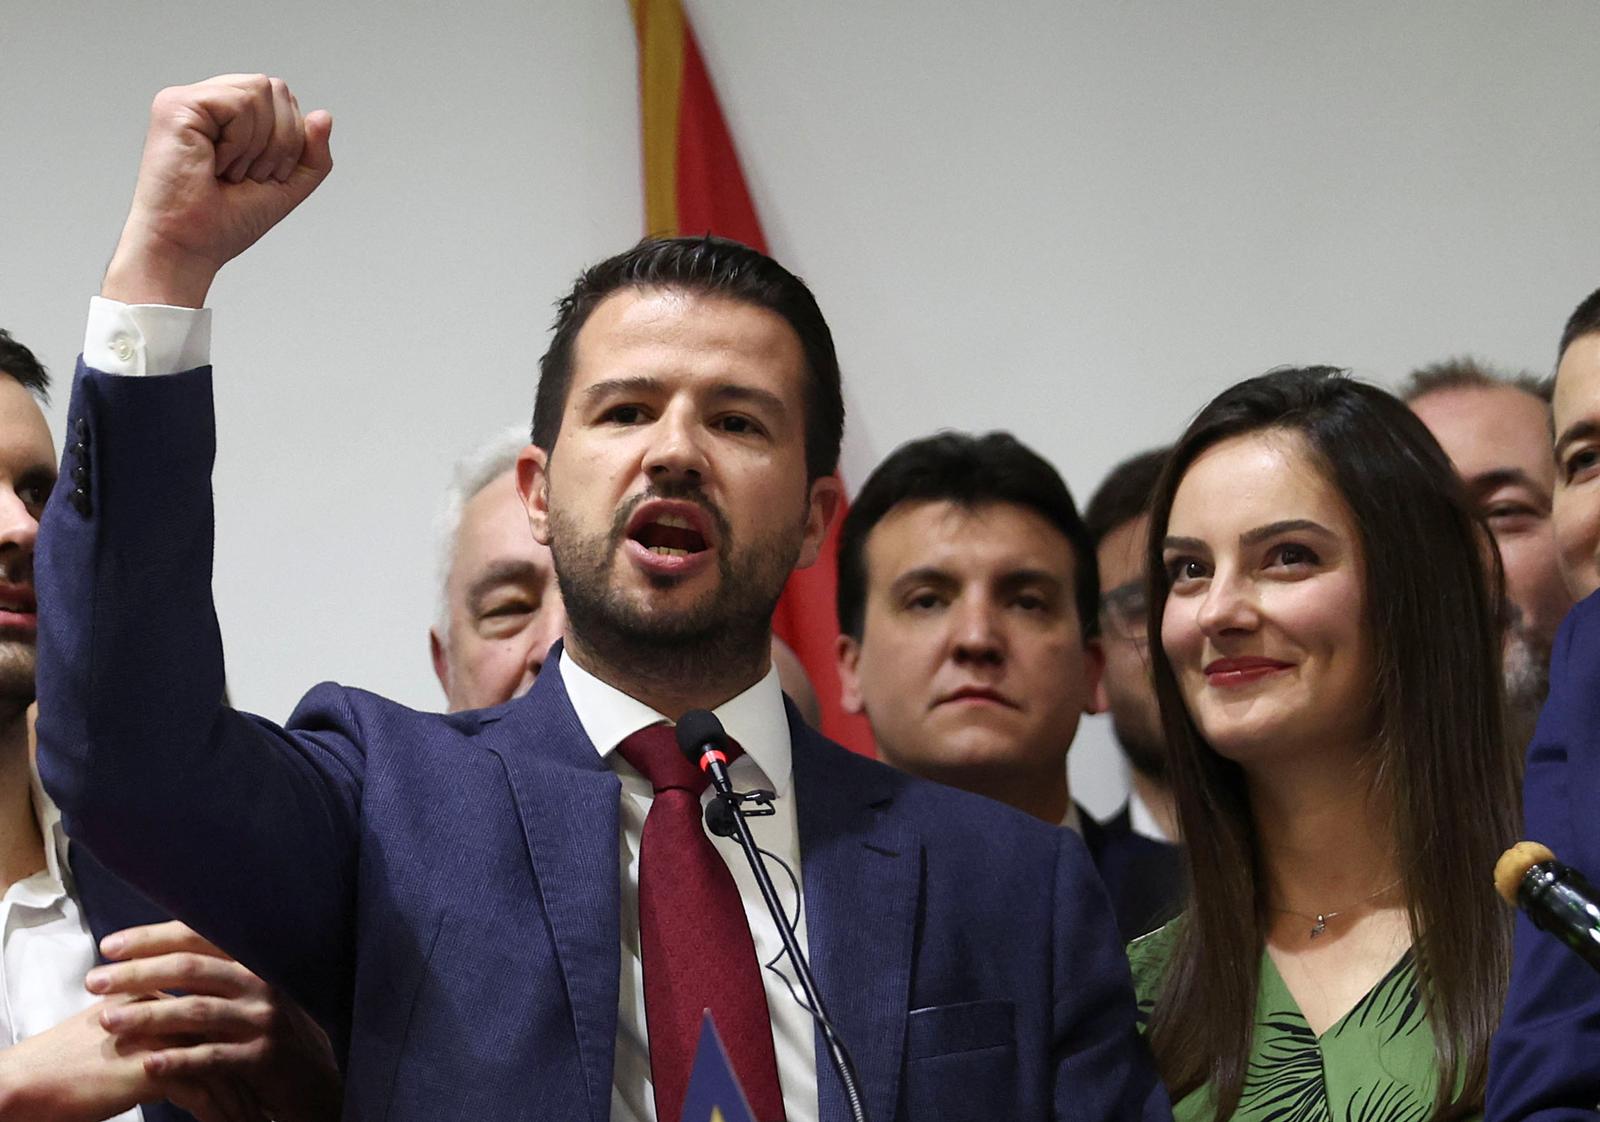 Jakov Milatovic, a presidential candidate from the Europe Now Movement, celebrates next to his wife Milena, after the first results of the presidential election were announced, in Podgorica, Montenegro, April 2, 2023. REUTERS/Marko Djurica Photo: MARKO DJURICA/REUTERS